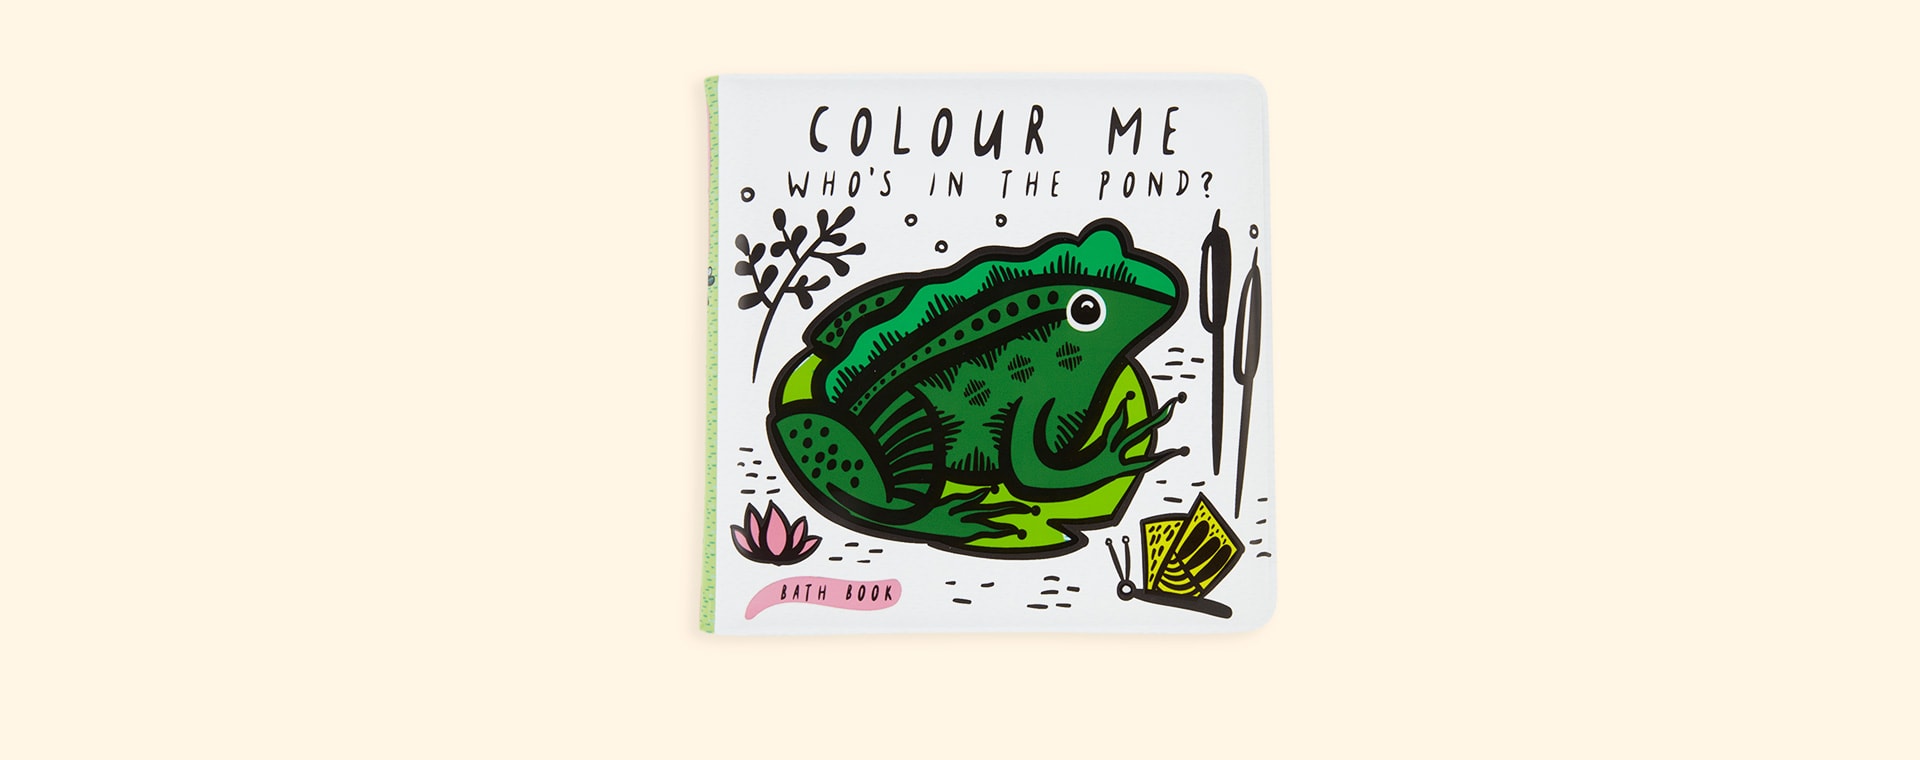 Pond Wee Gallery Colour Me Bath Book